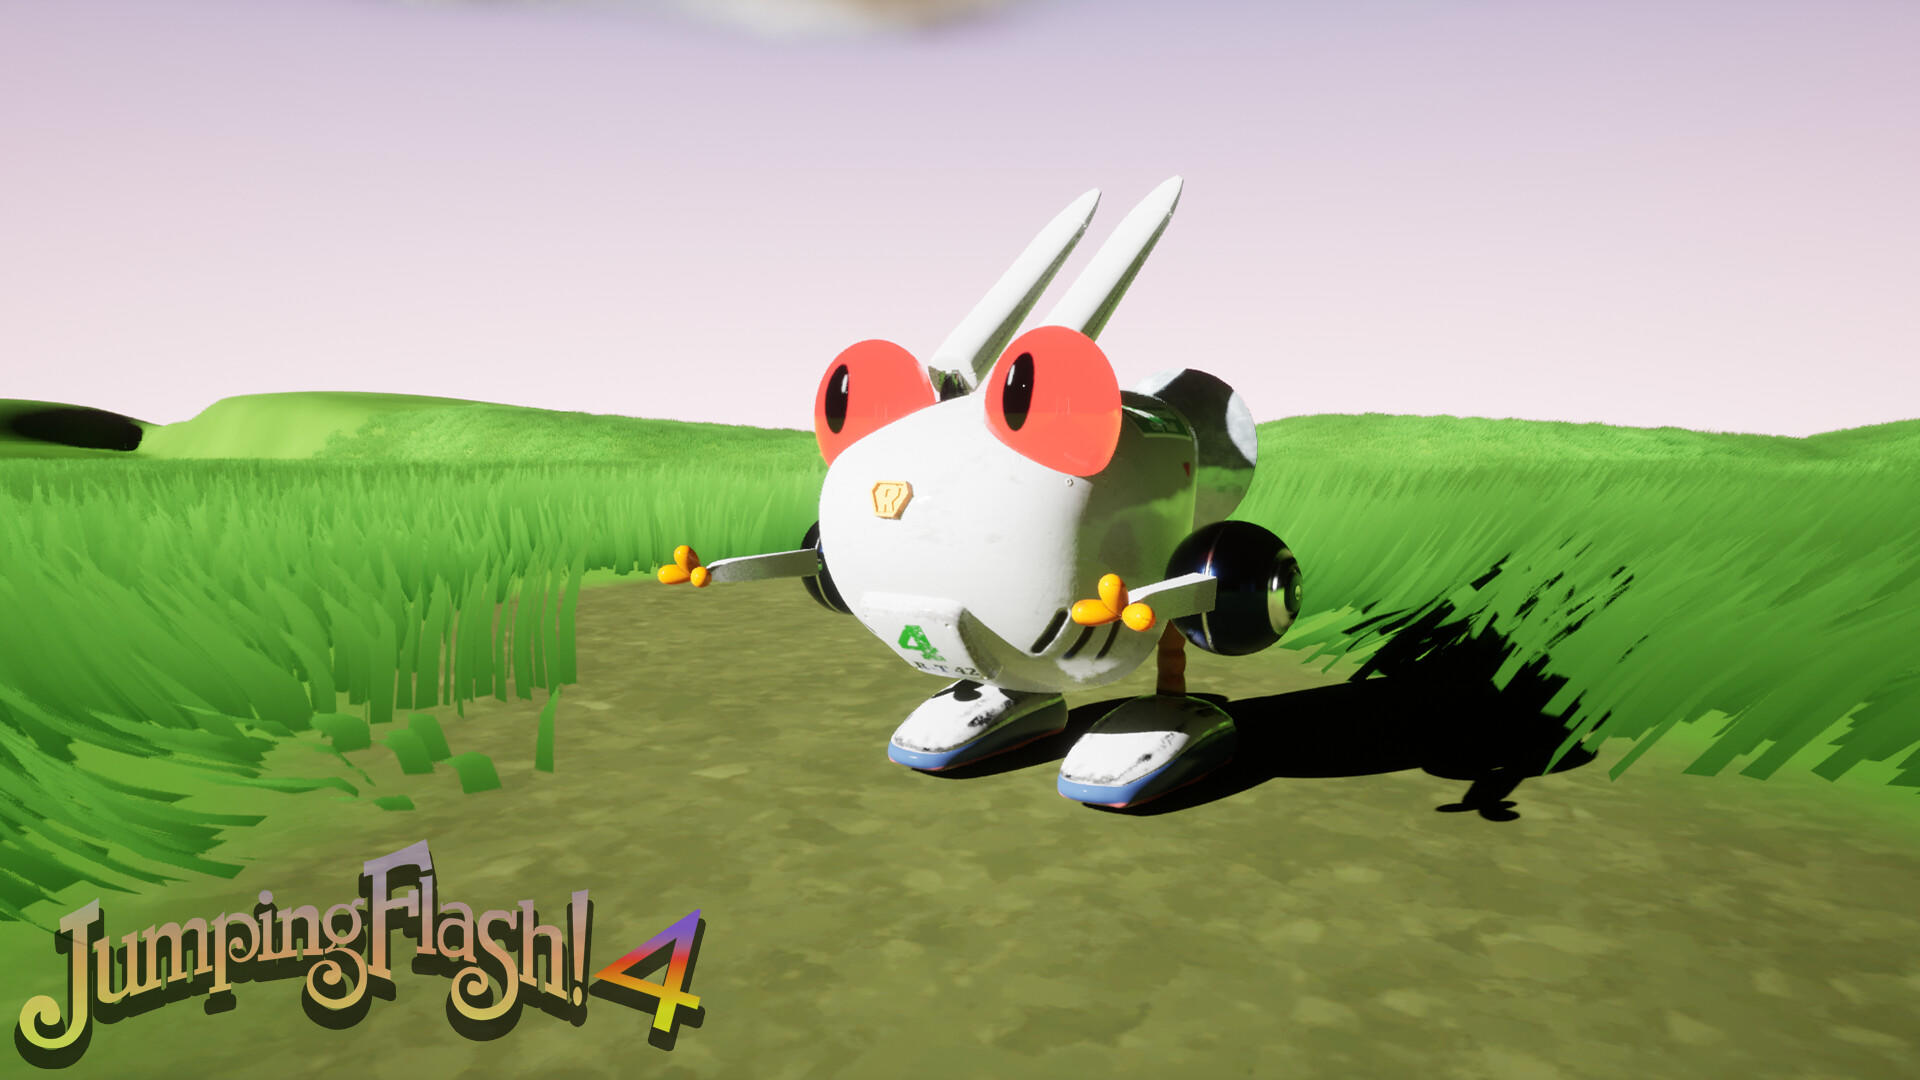 Screenshot of Jumping Flash 4: Return of Robbit | Playable Concept Pitch